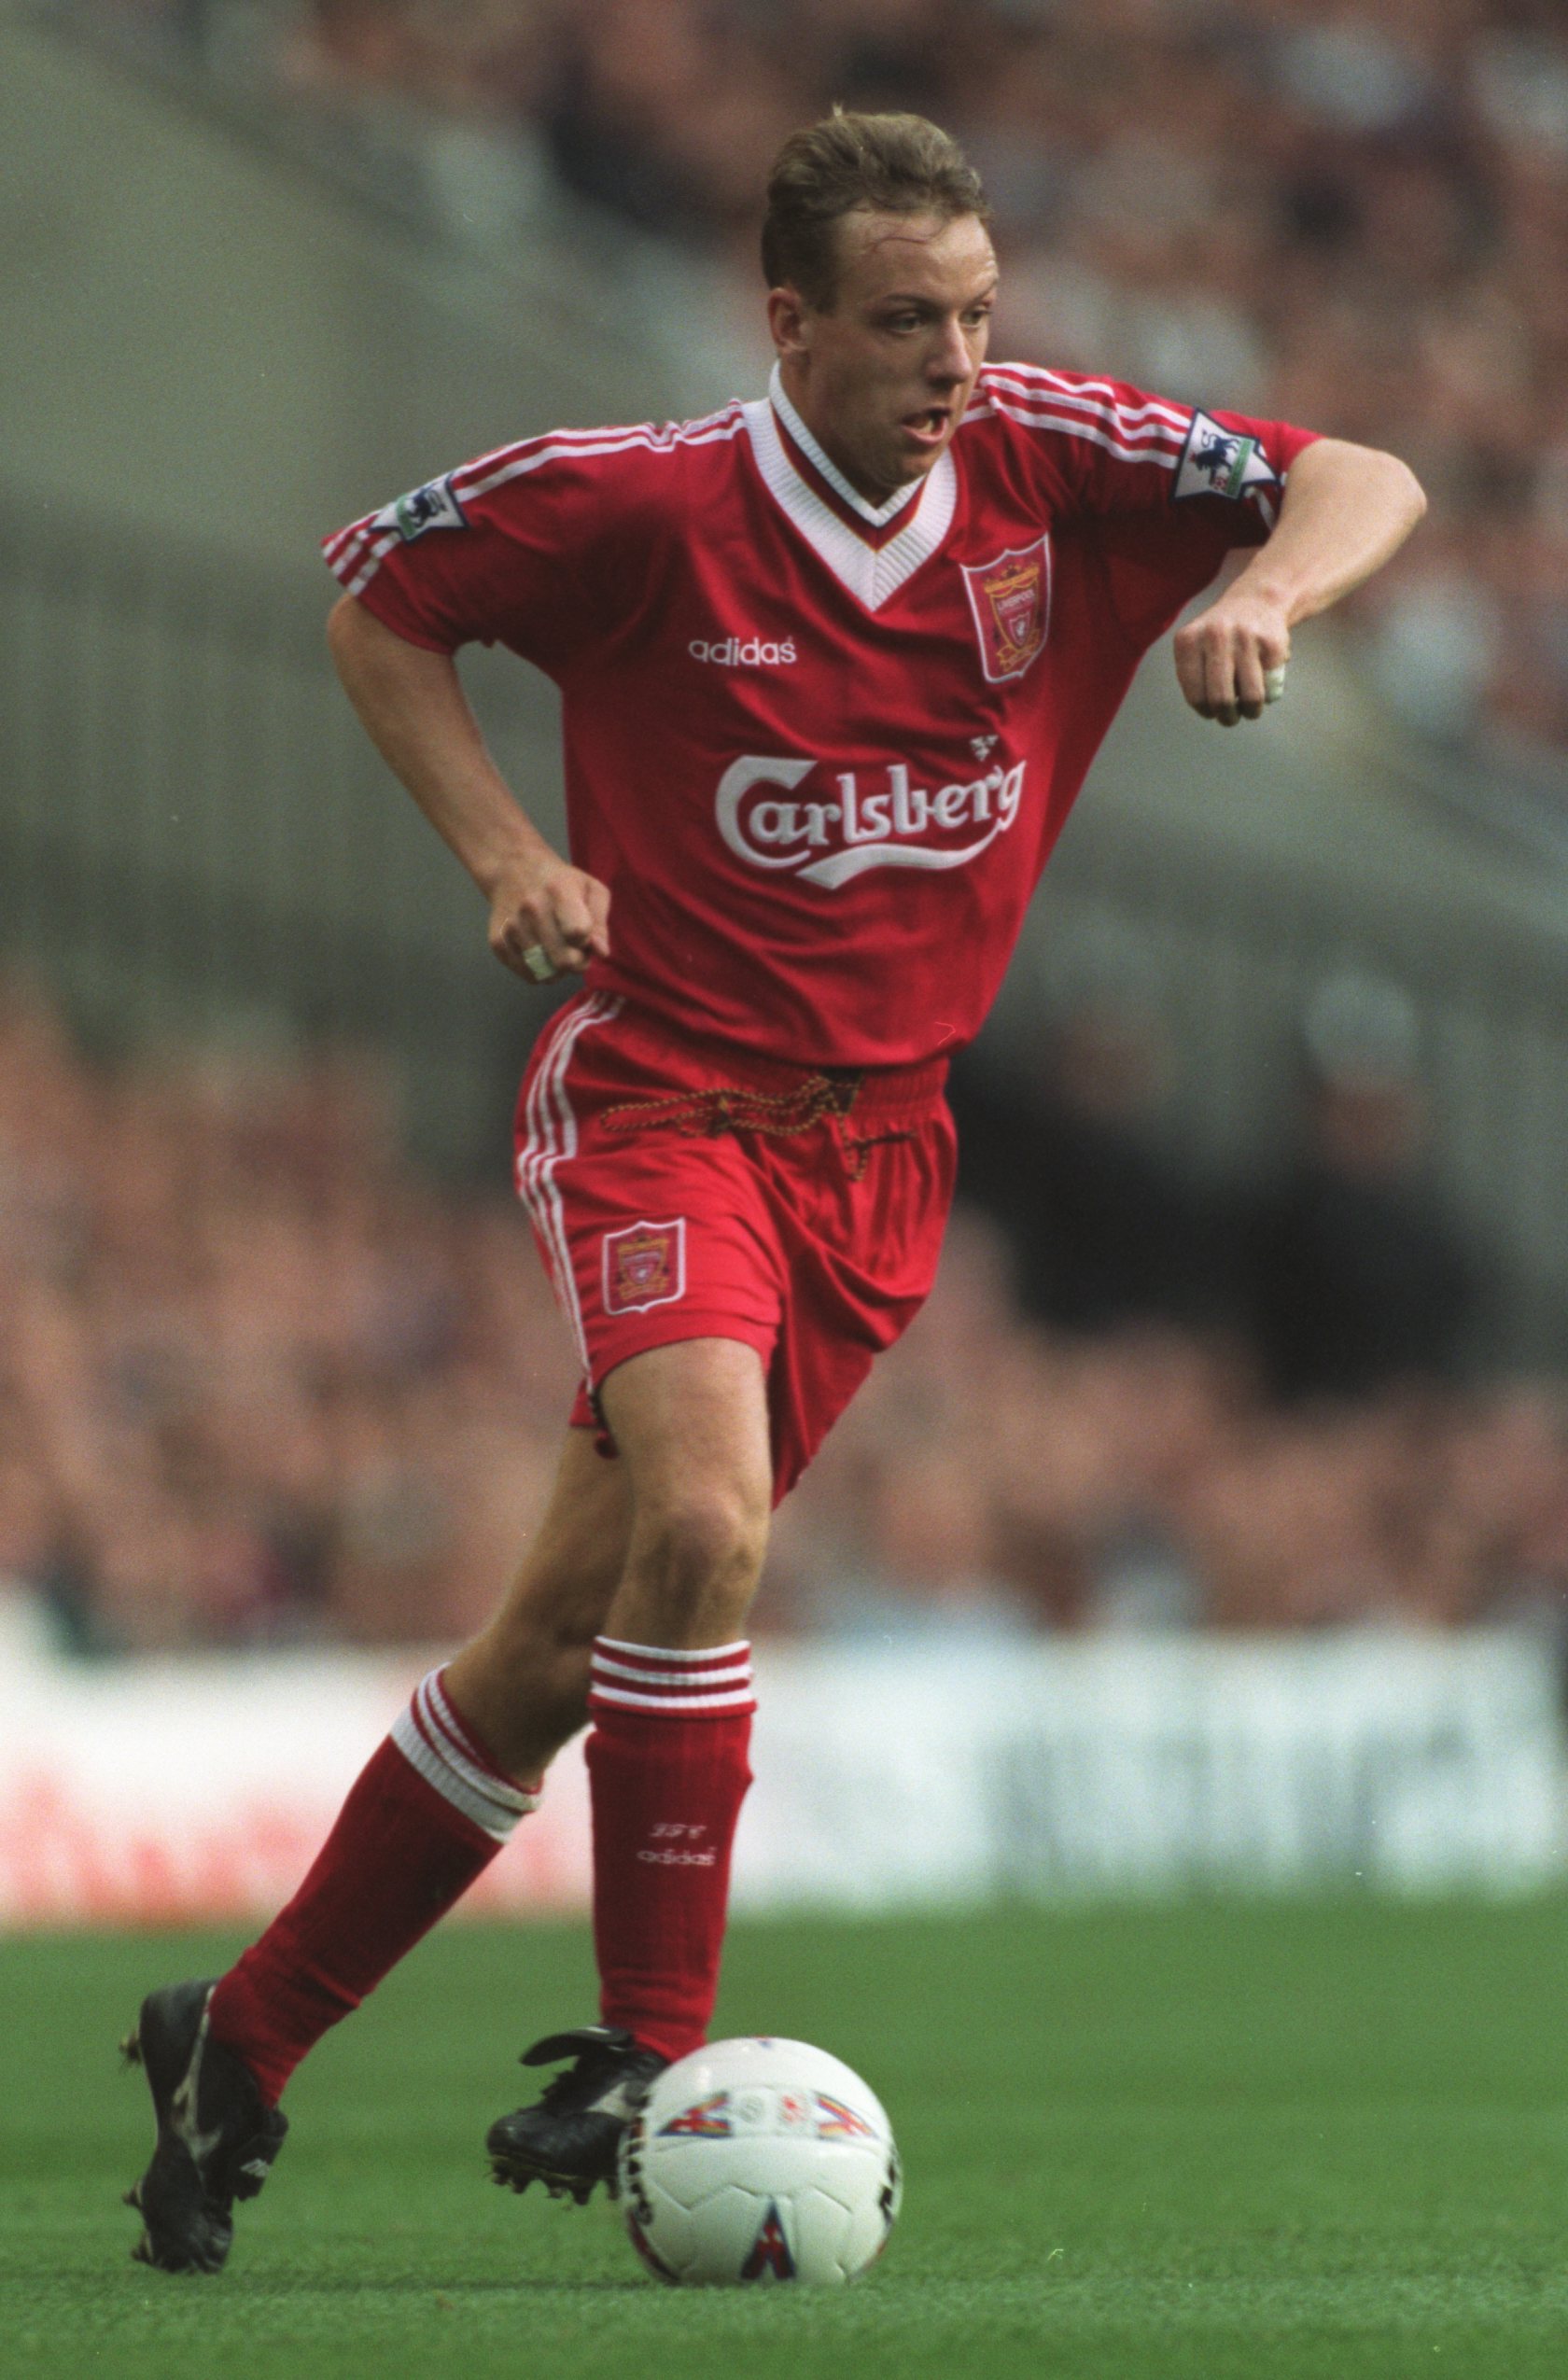 4 NOV 1995:  ROB JONES IN ACTION FOR LIVERPOOL DURING THE PREMIER LEAGUE MATCH AGAINST NEWCASTLE AT ST JAMES PARK. NEWCASTLE WON 2-1. Mandatory Credit: Anton Want/ALLSPORT